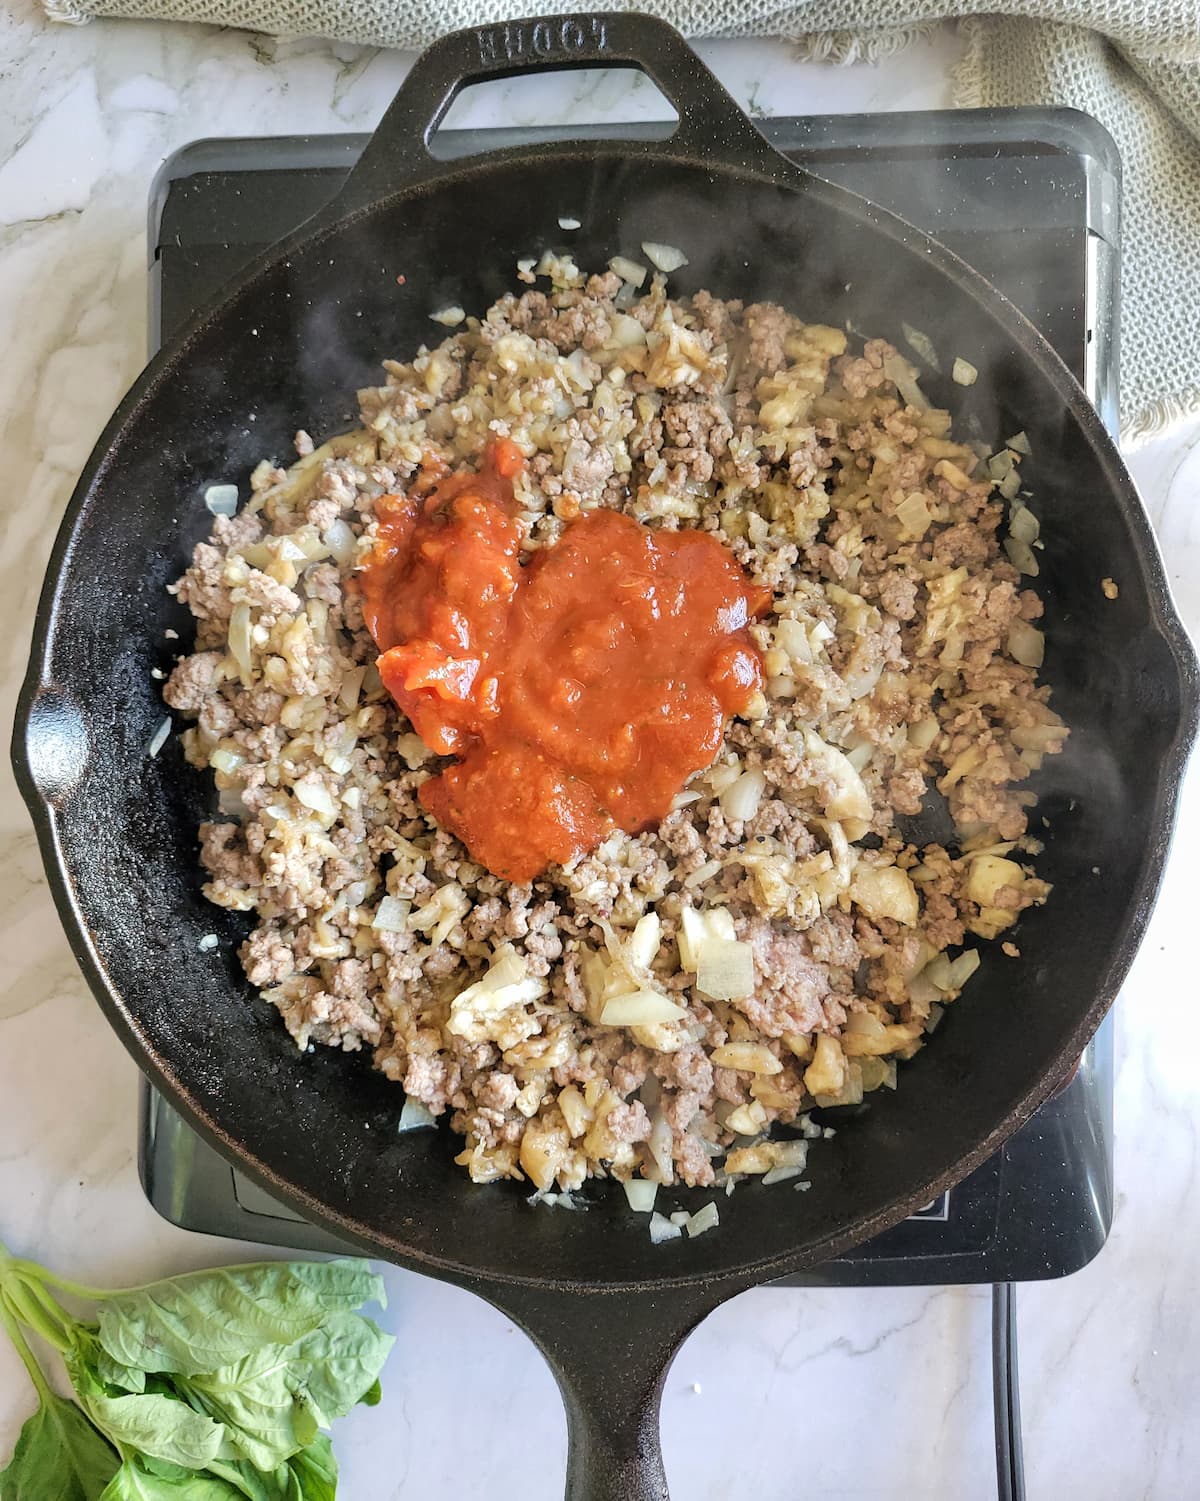 tomato sauce and ground beef simmering in a cast iron skillet